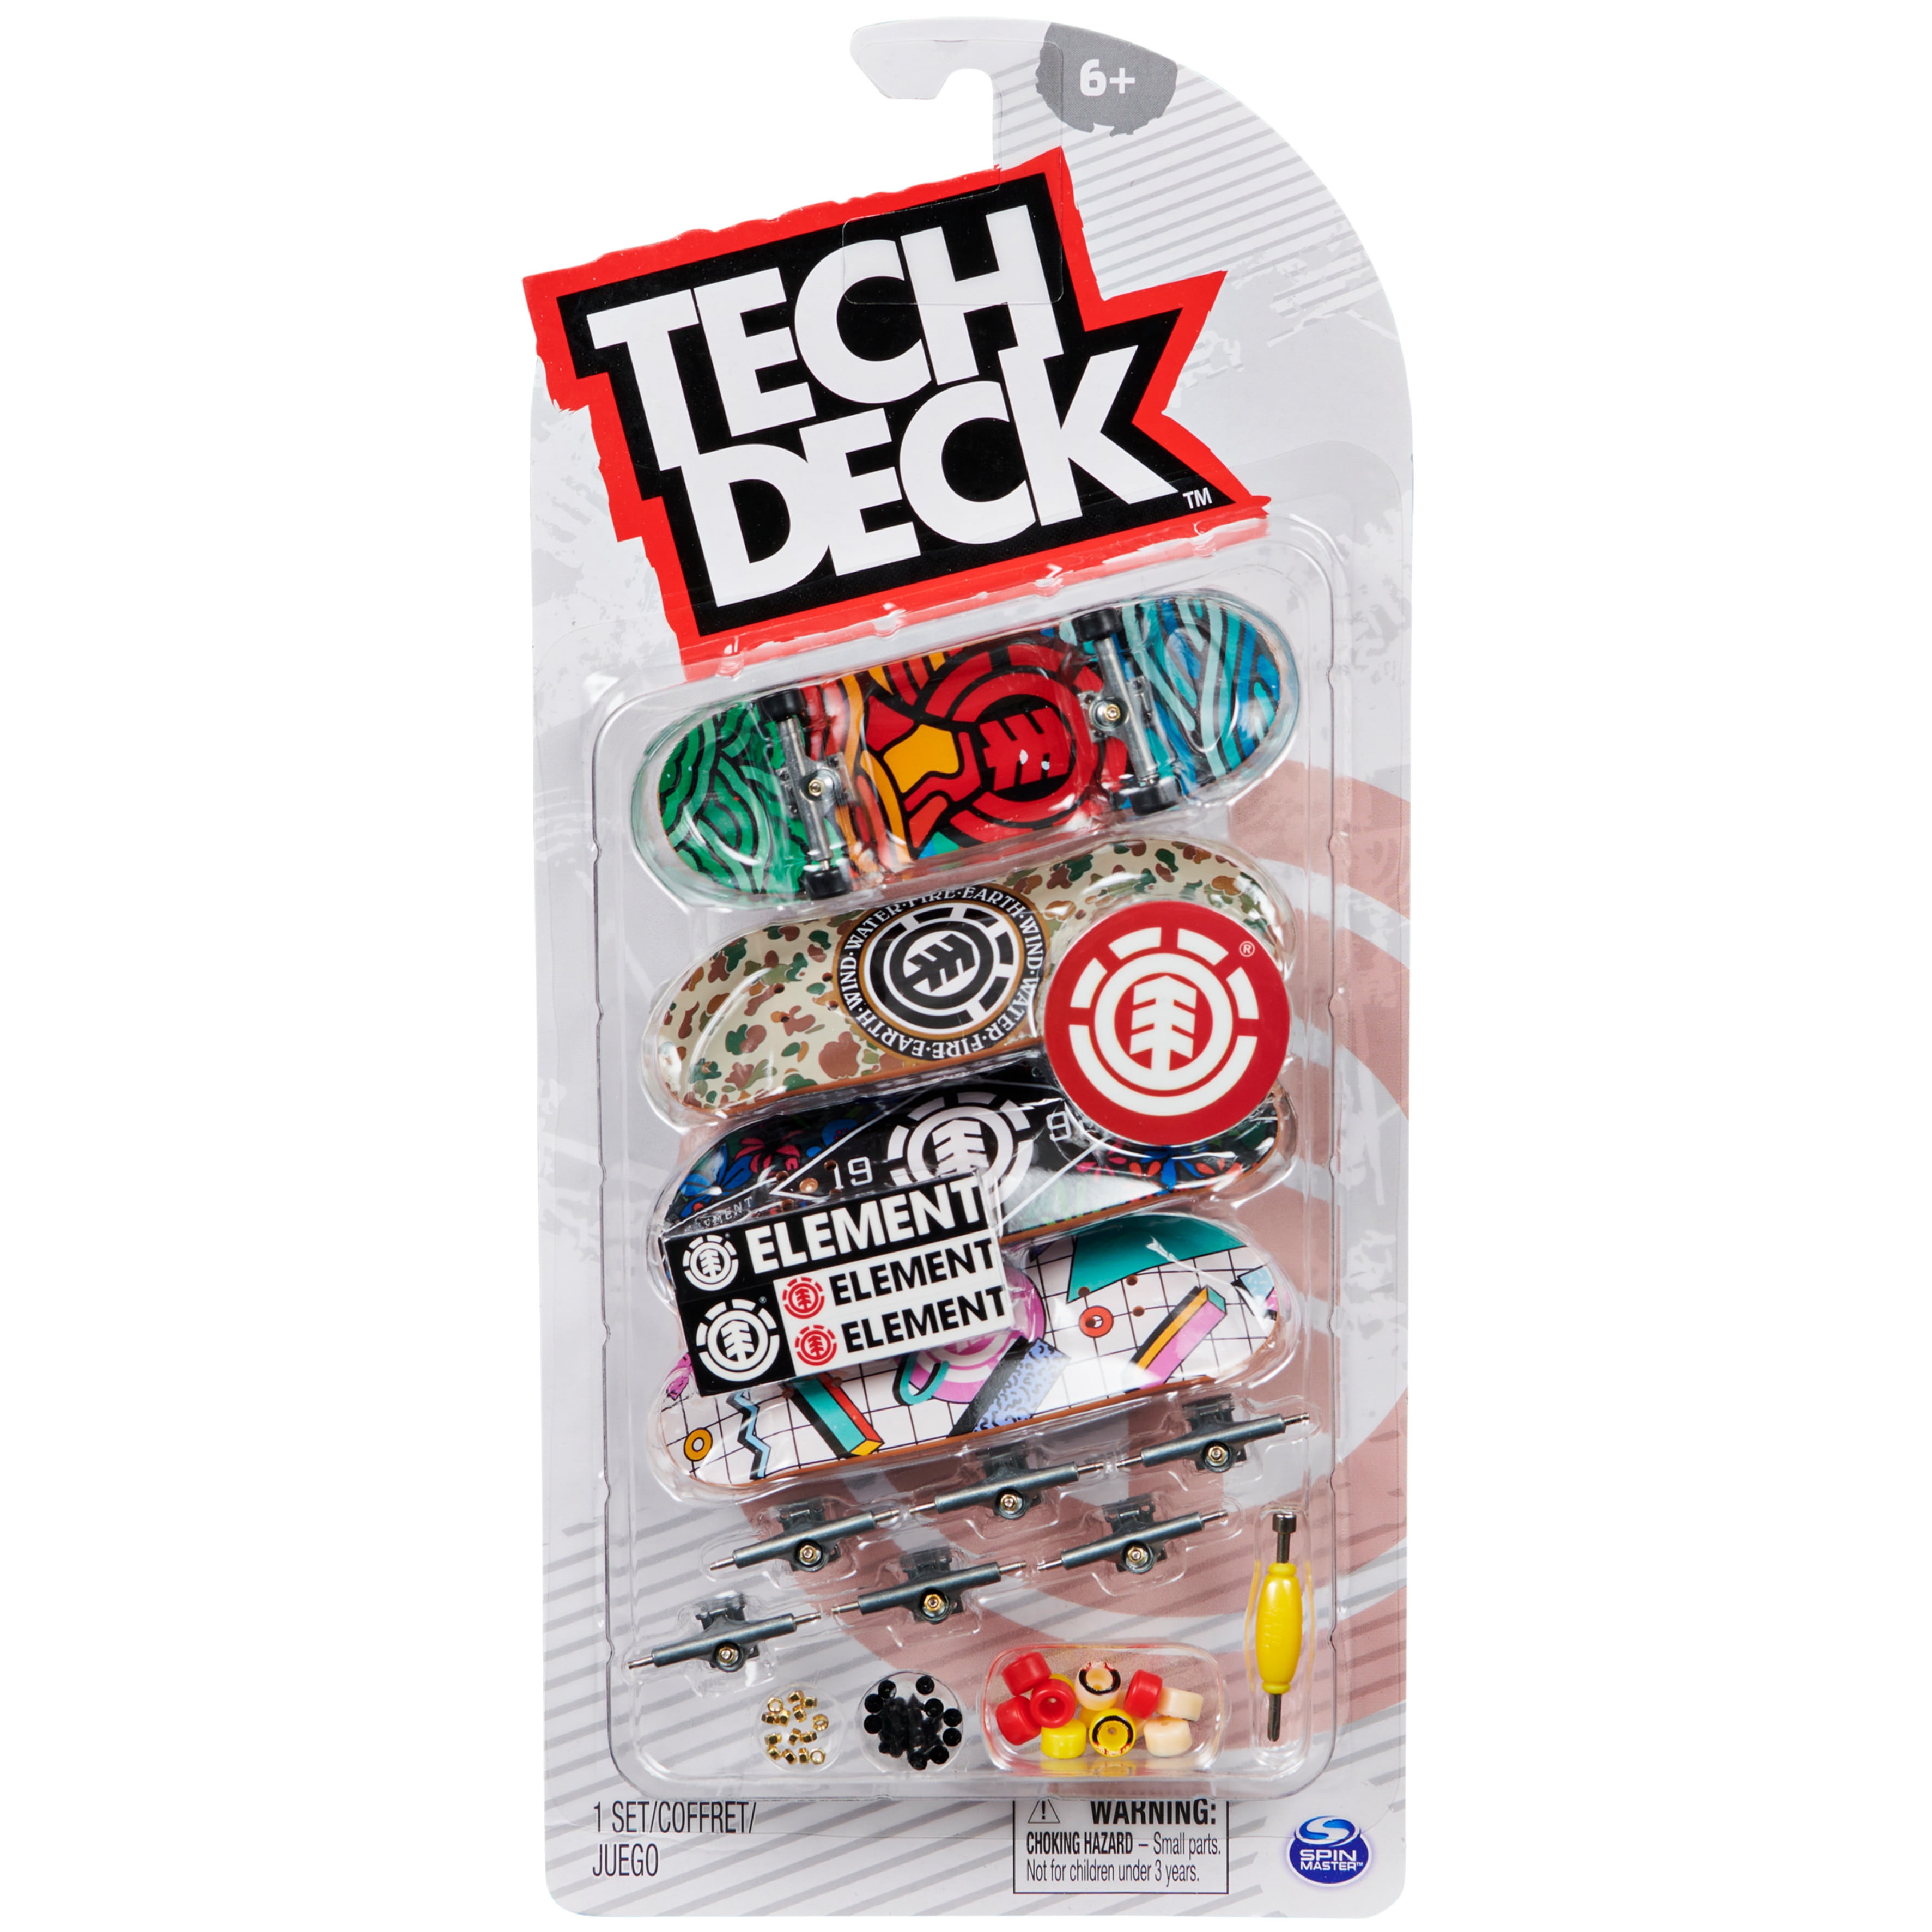 Details about   ONE OF A KIND Tech Deck BIRDHOUSE 96mm Fingerboard New in Box 